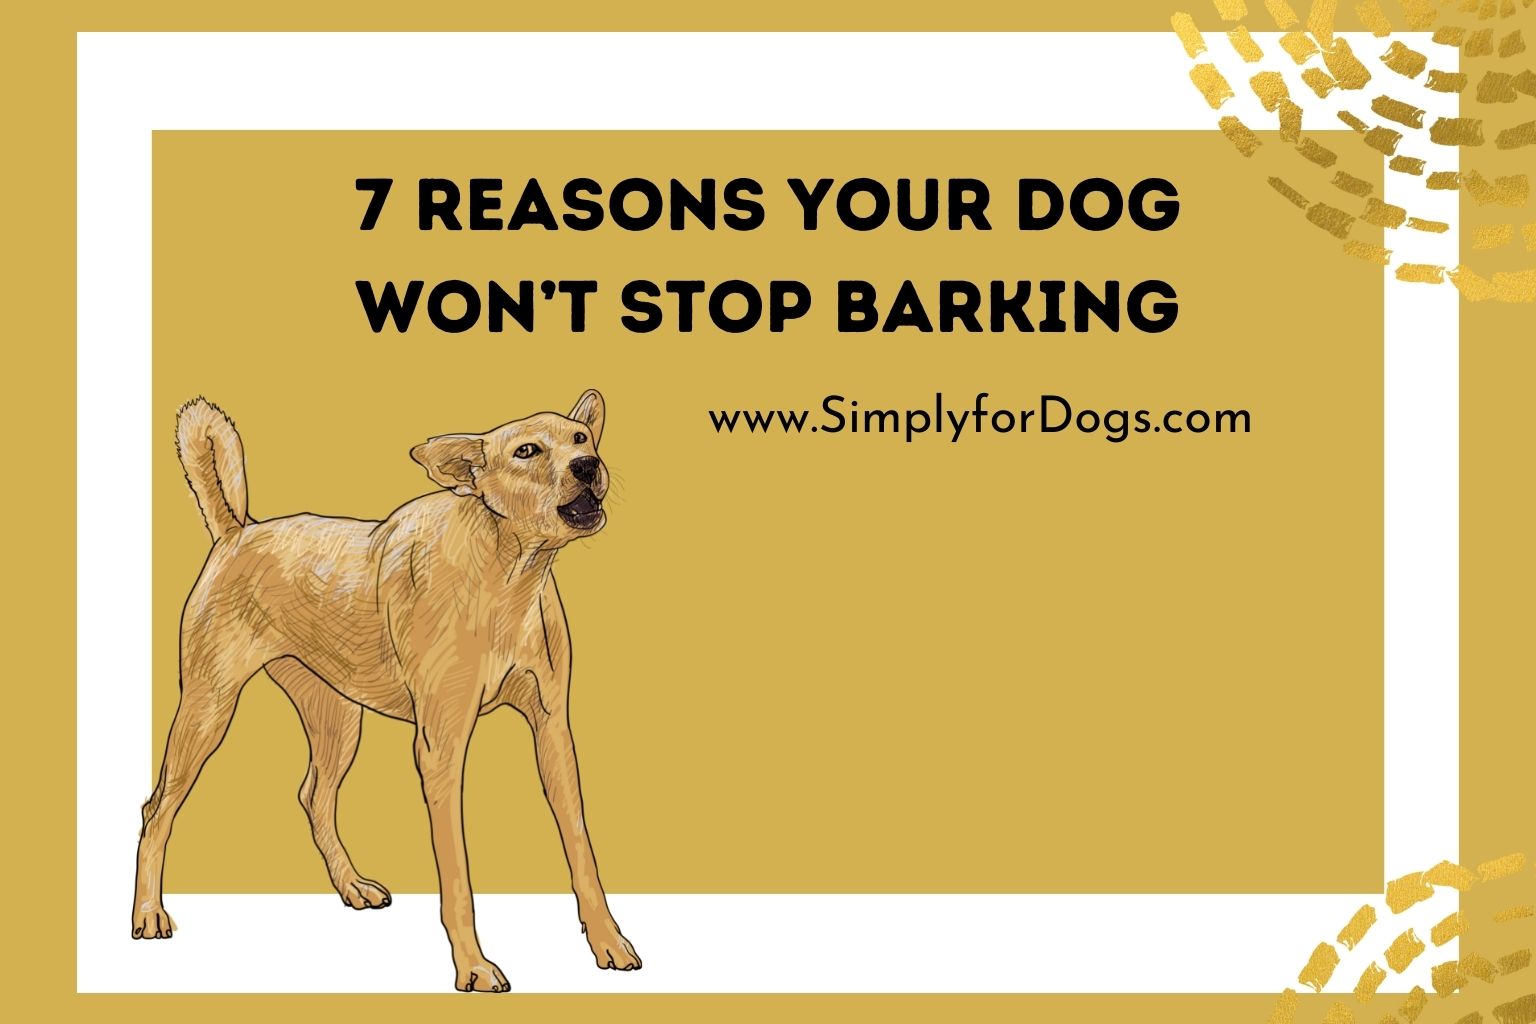 7 Reasons Your Dog Won’t Stop Barking